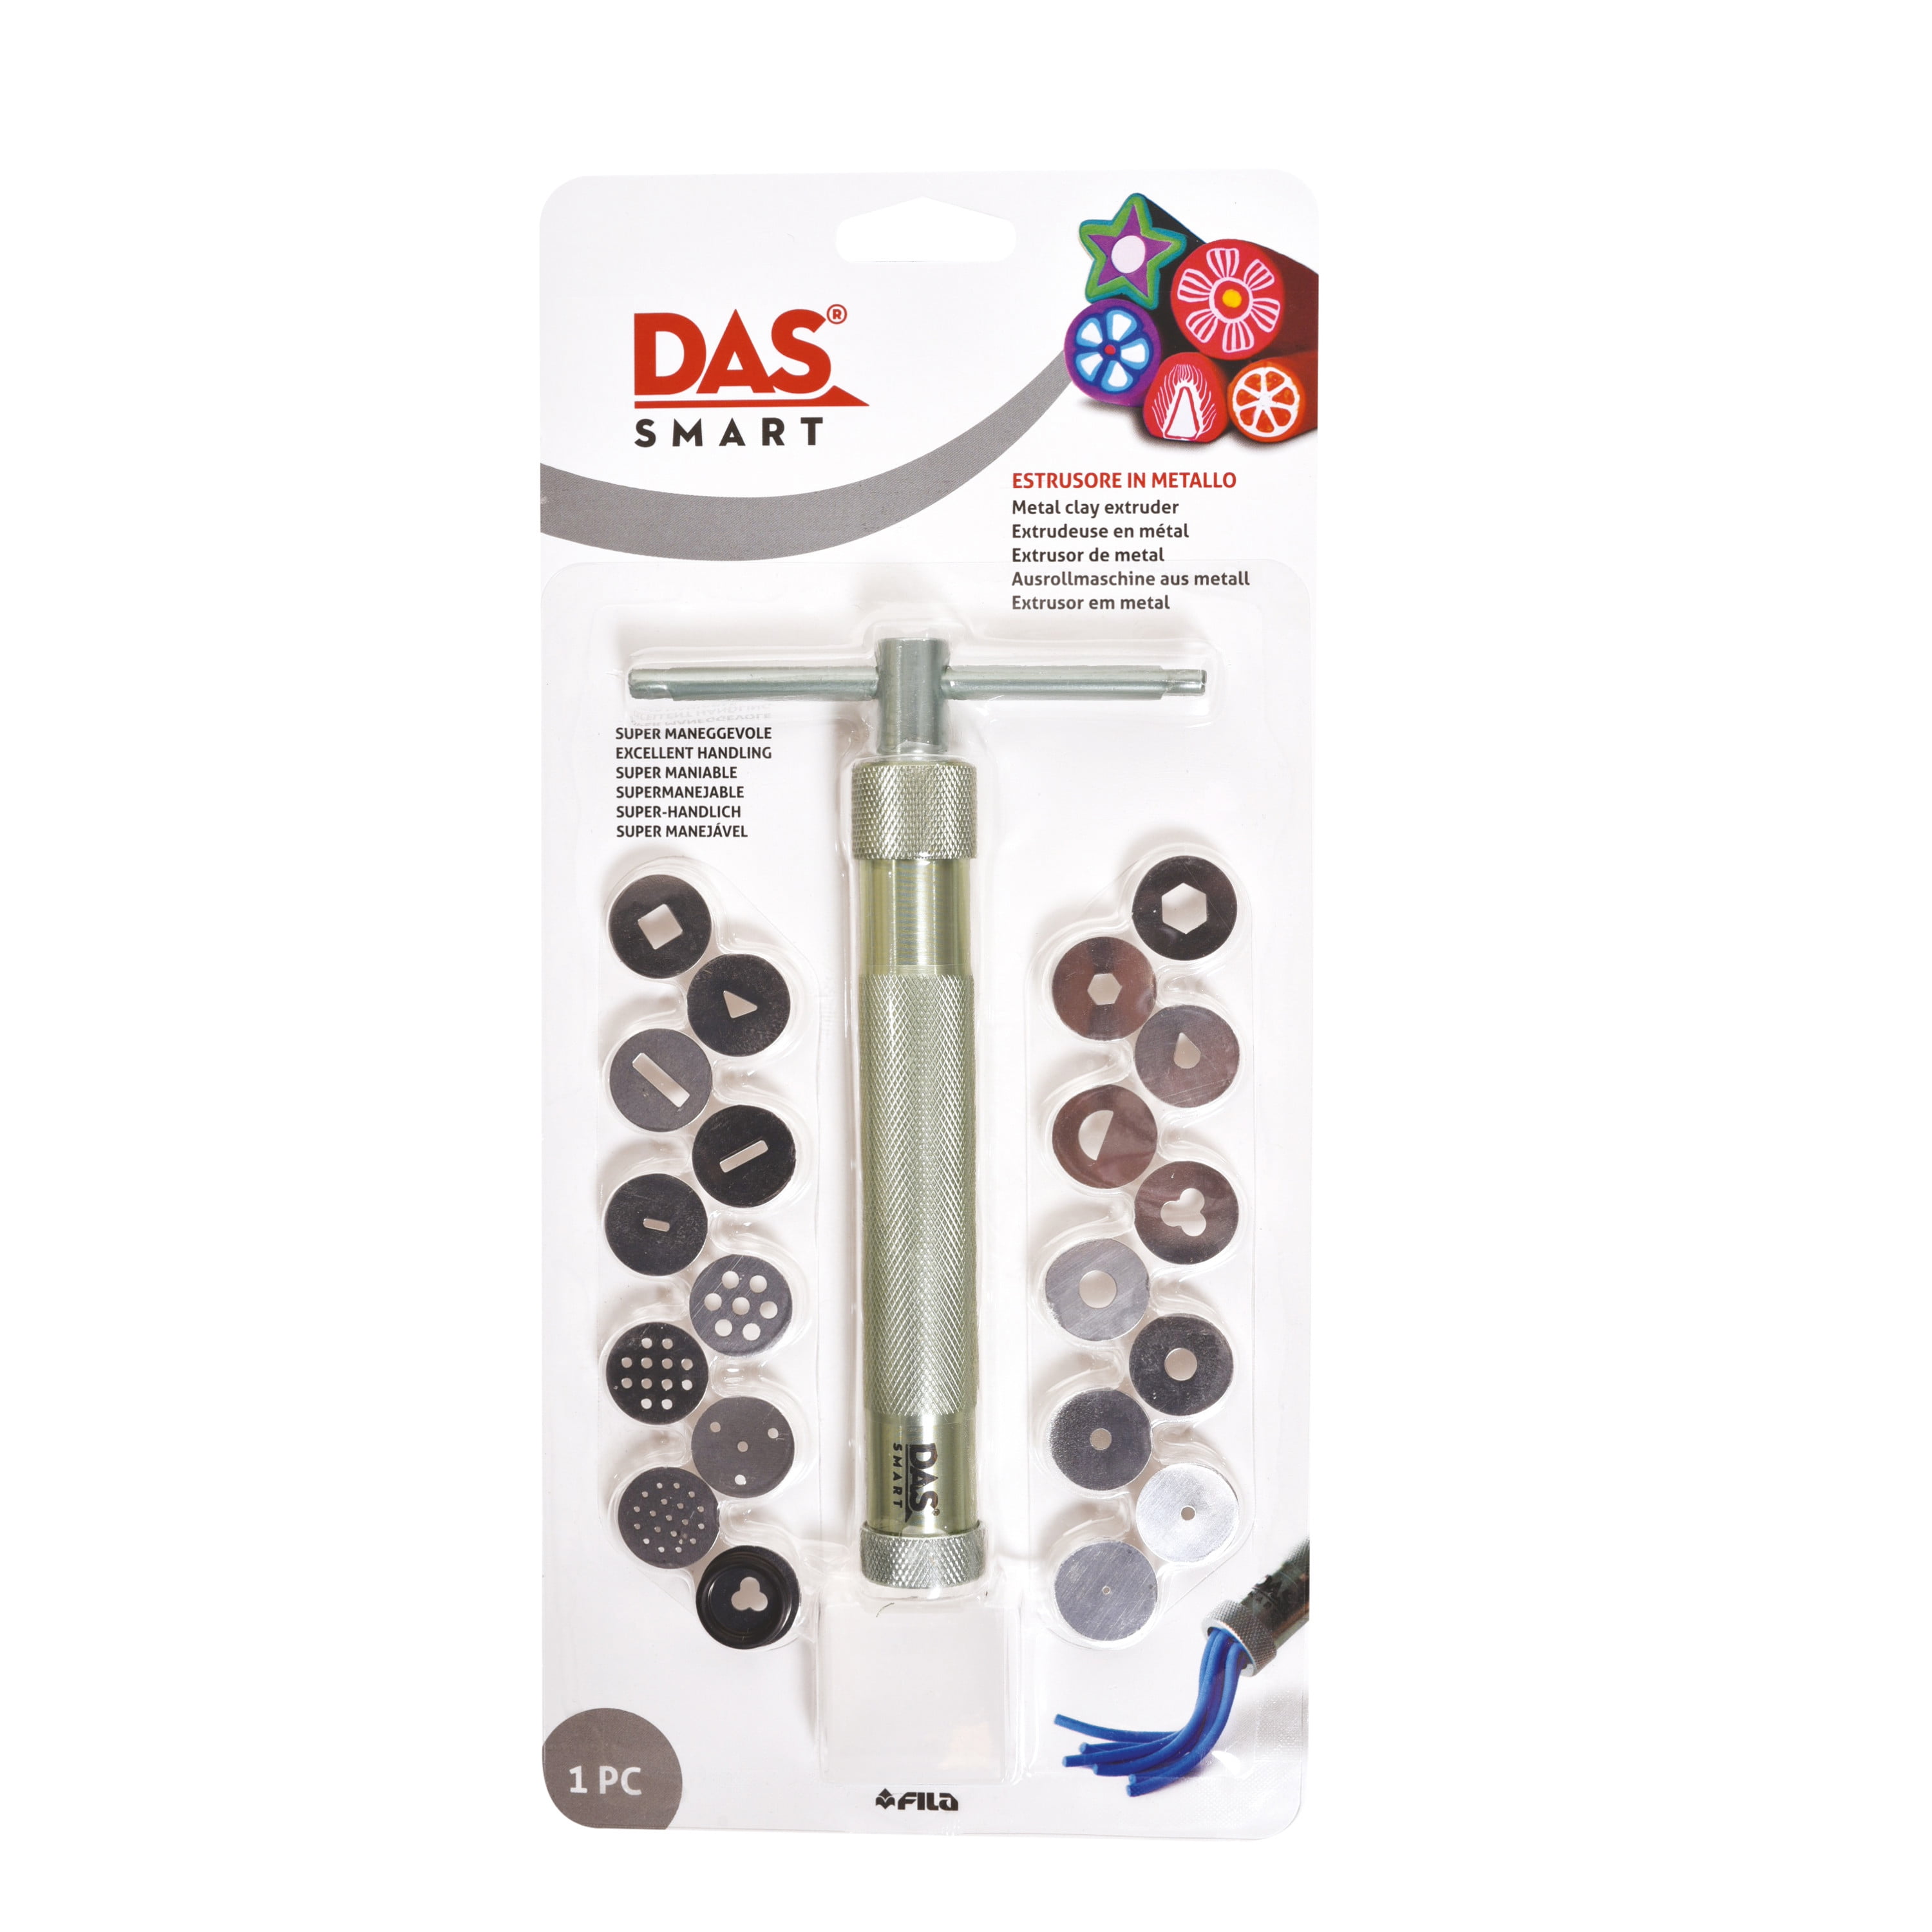  DAS Smart Metal Clay Extruder - Clay Extruder Tool with 20  Interchangeable Disks - Aluminum Hand Extruder Set for Artists and Students  - Durable Easy to Use Clay Extruder for